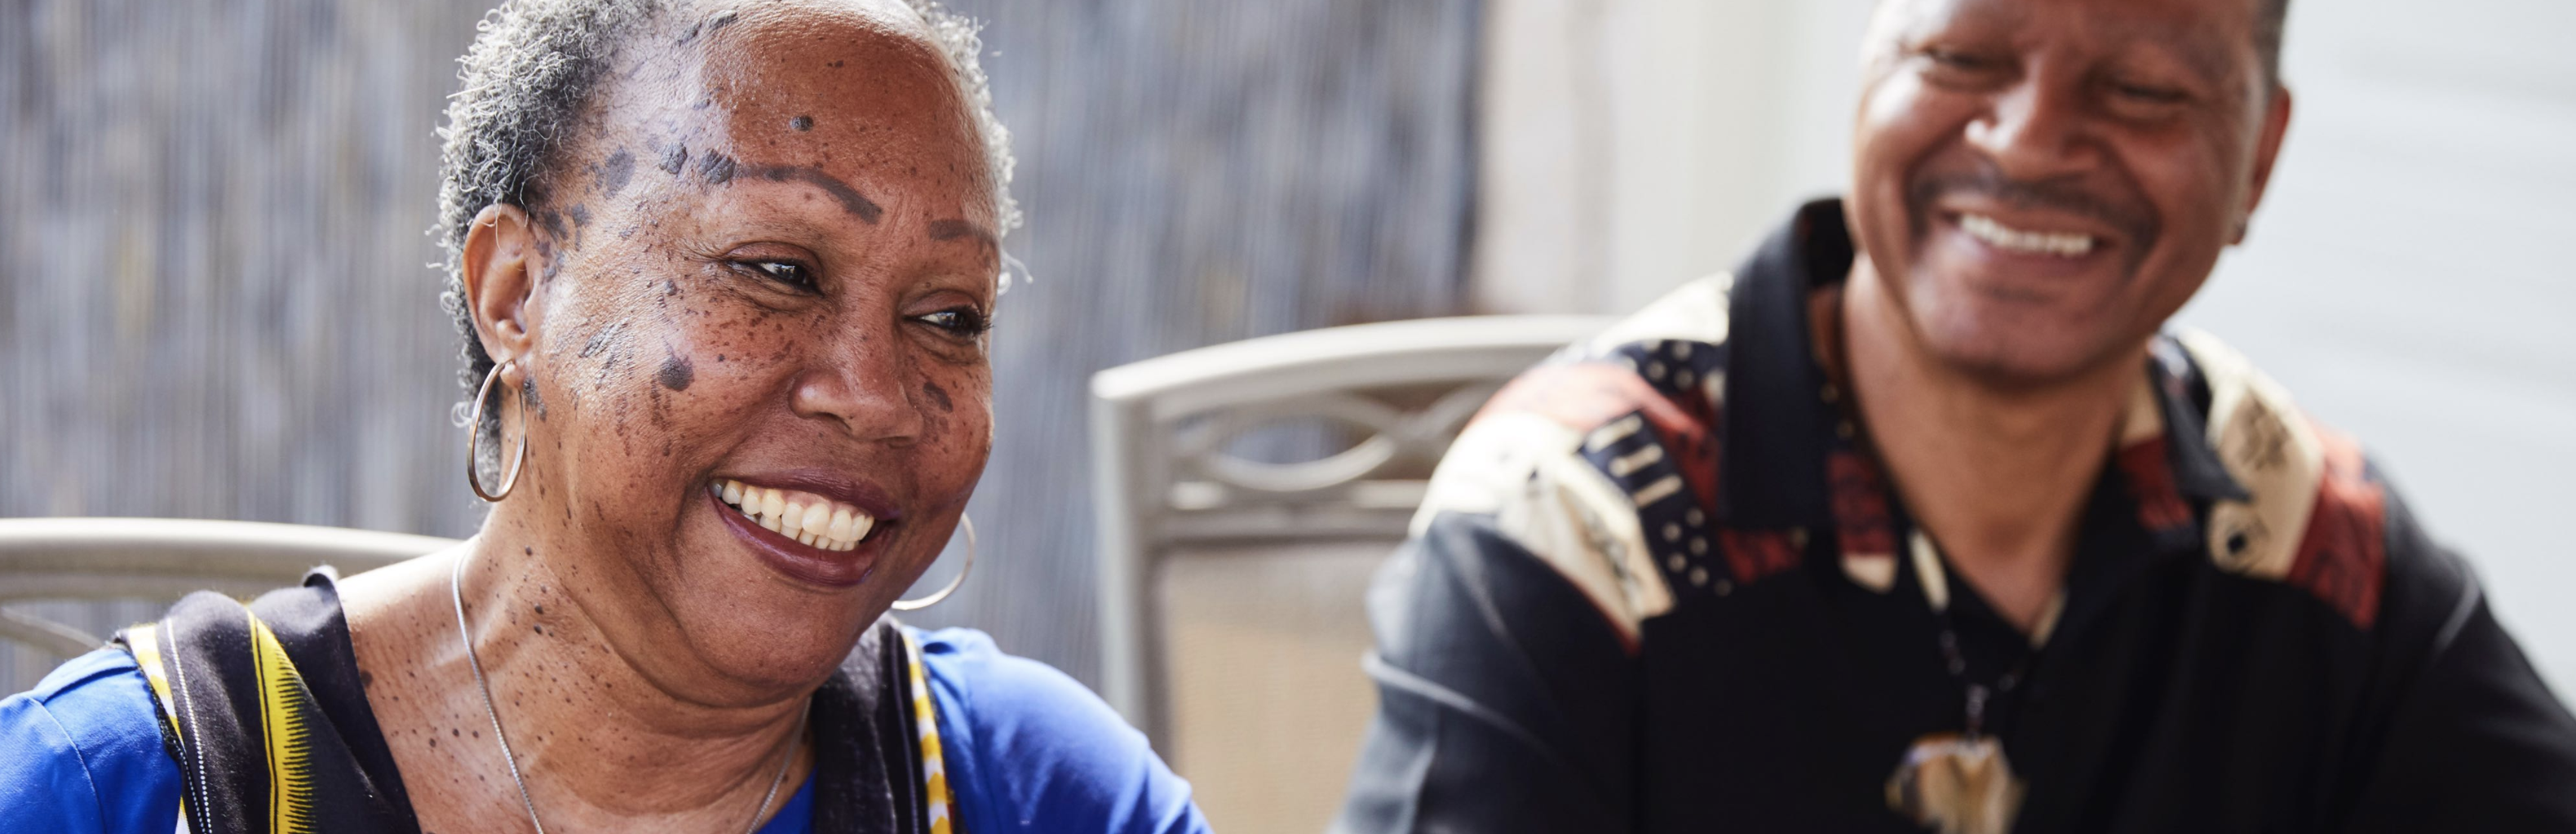 Older Black woman smiling on left, out of focus smiling Black man on right